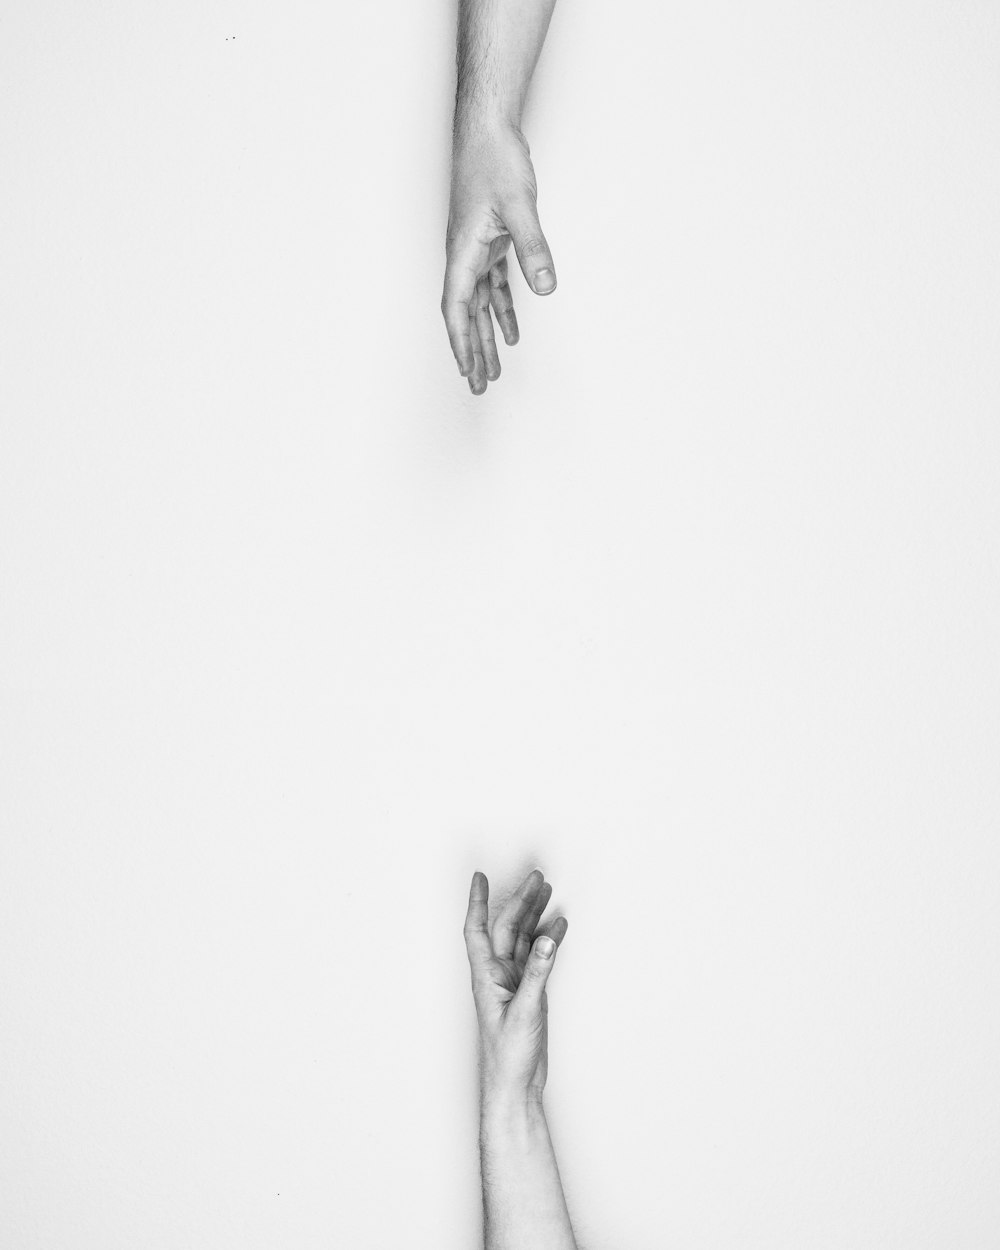 Two hands reaching for each other.